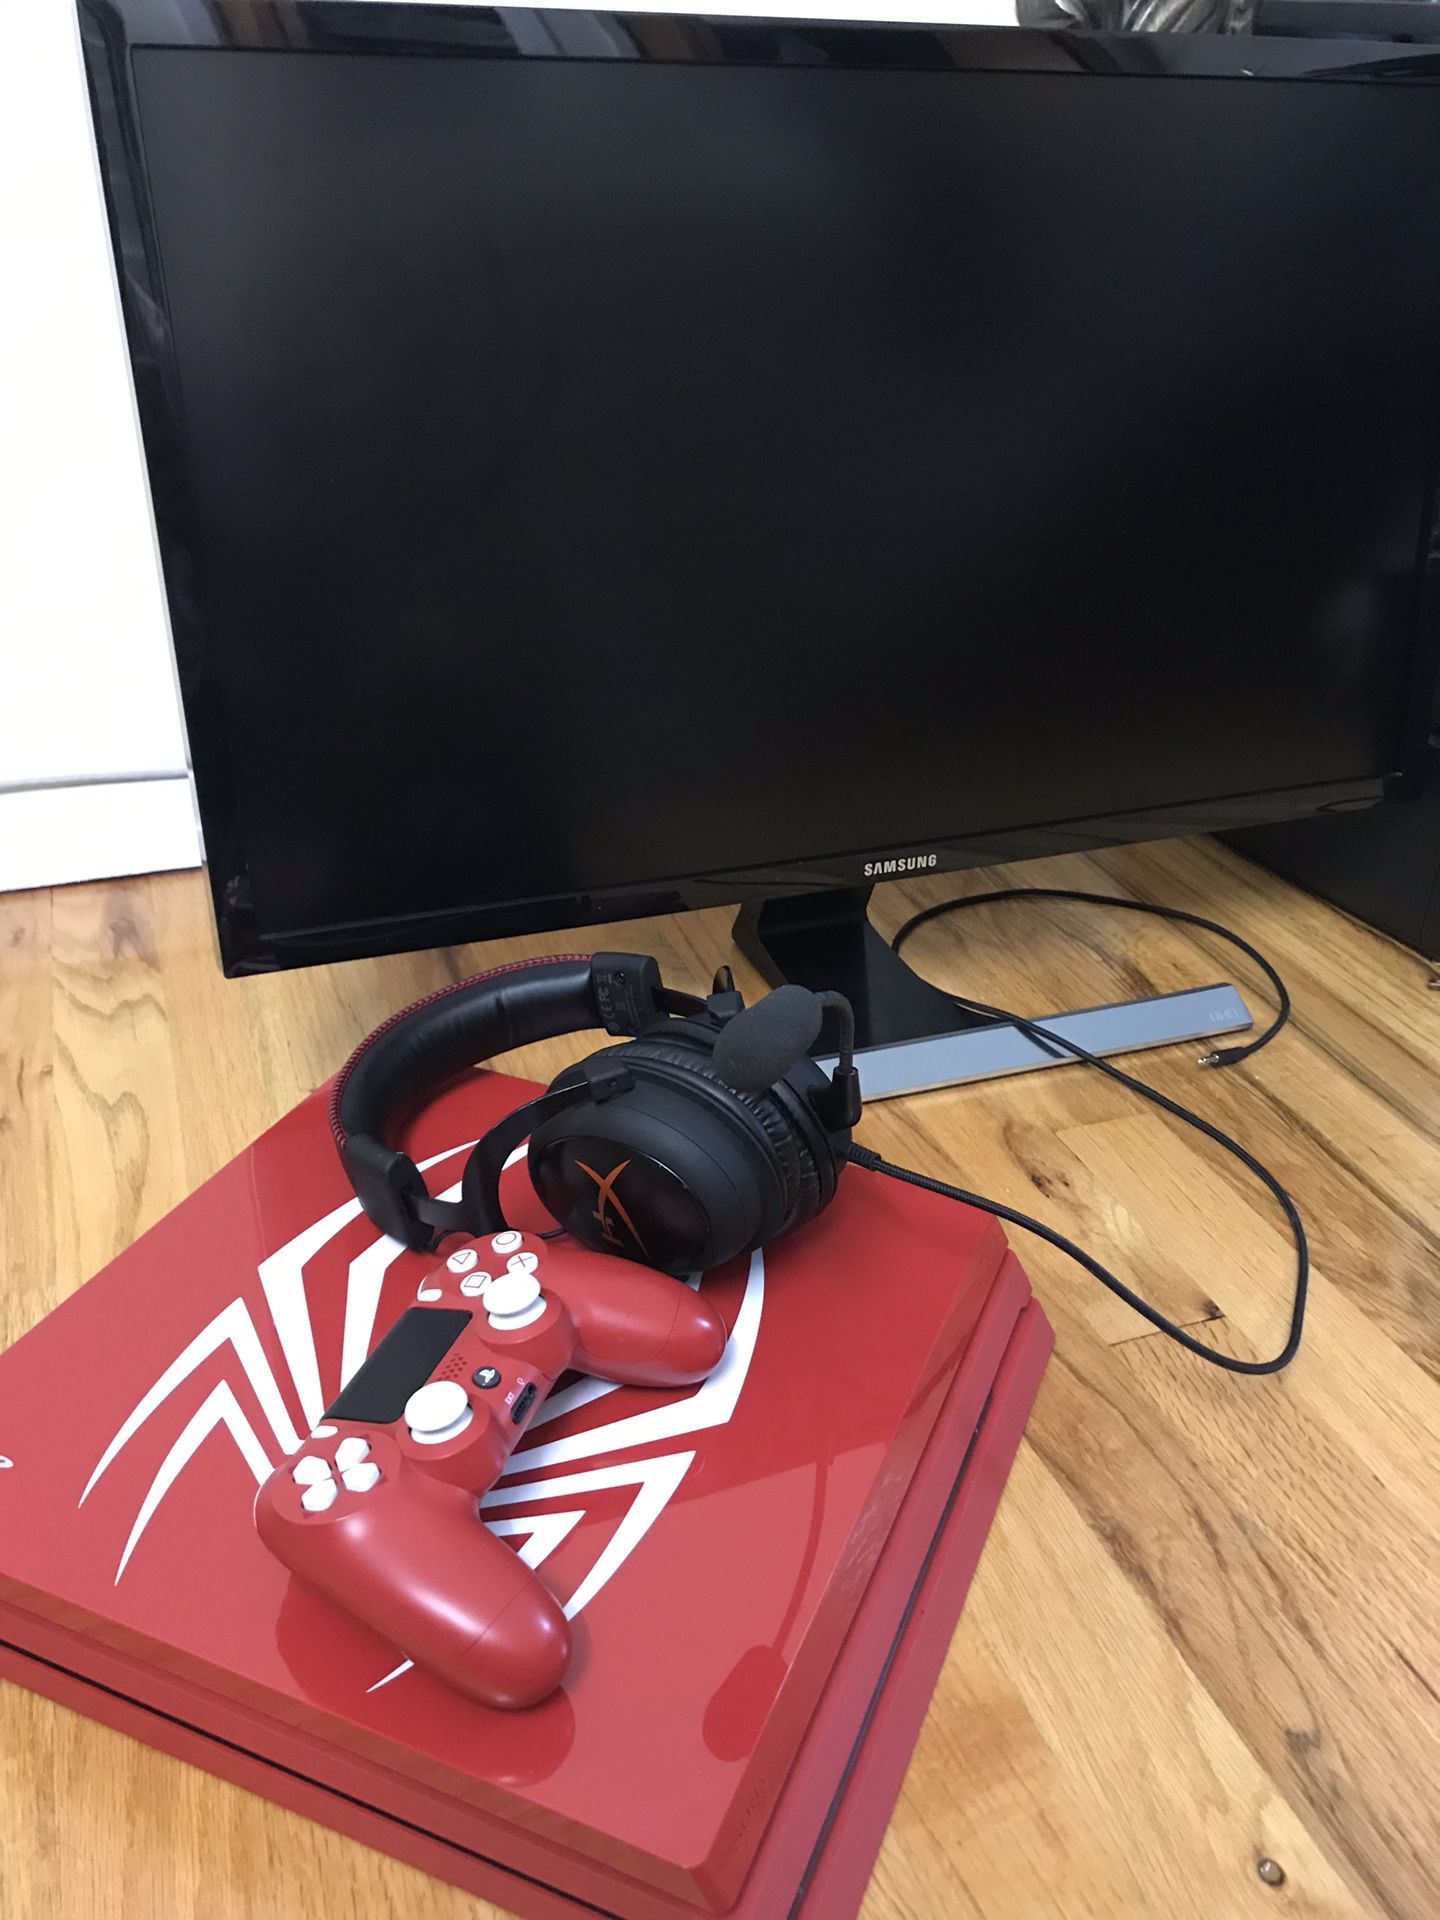 Spider-Man PS4 pro with 28 inch Samsung 4K monitor (FREE HYPERX HEADSET)